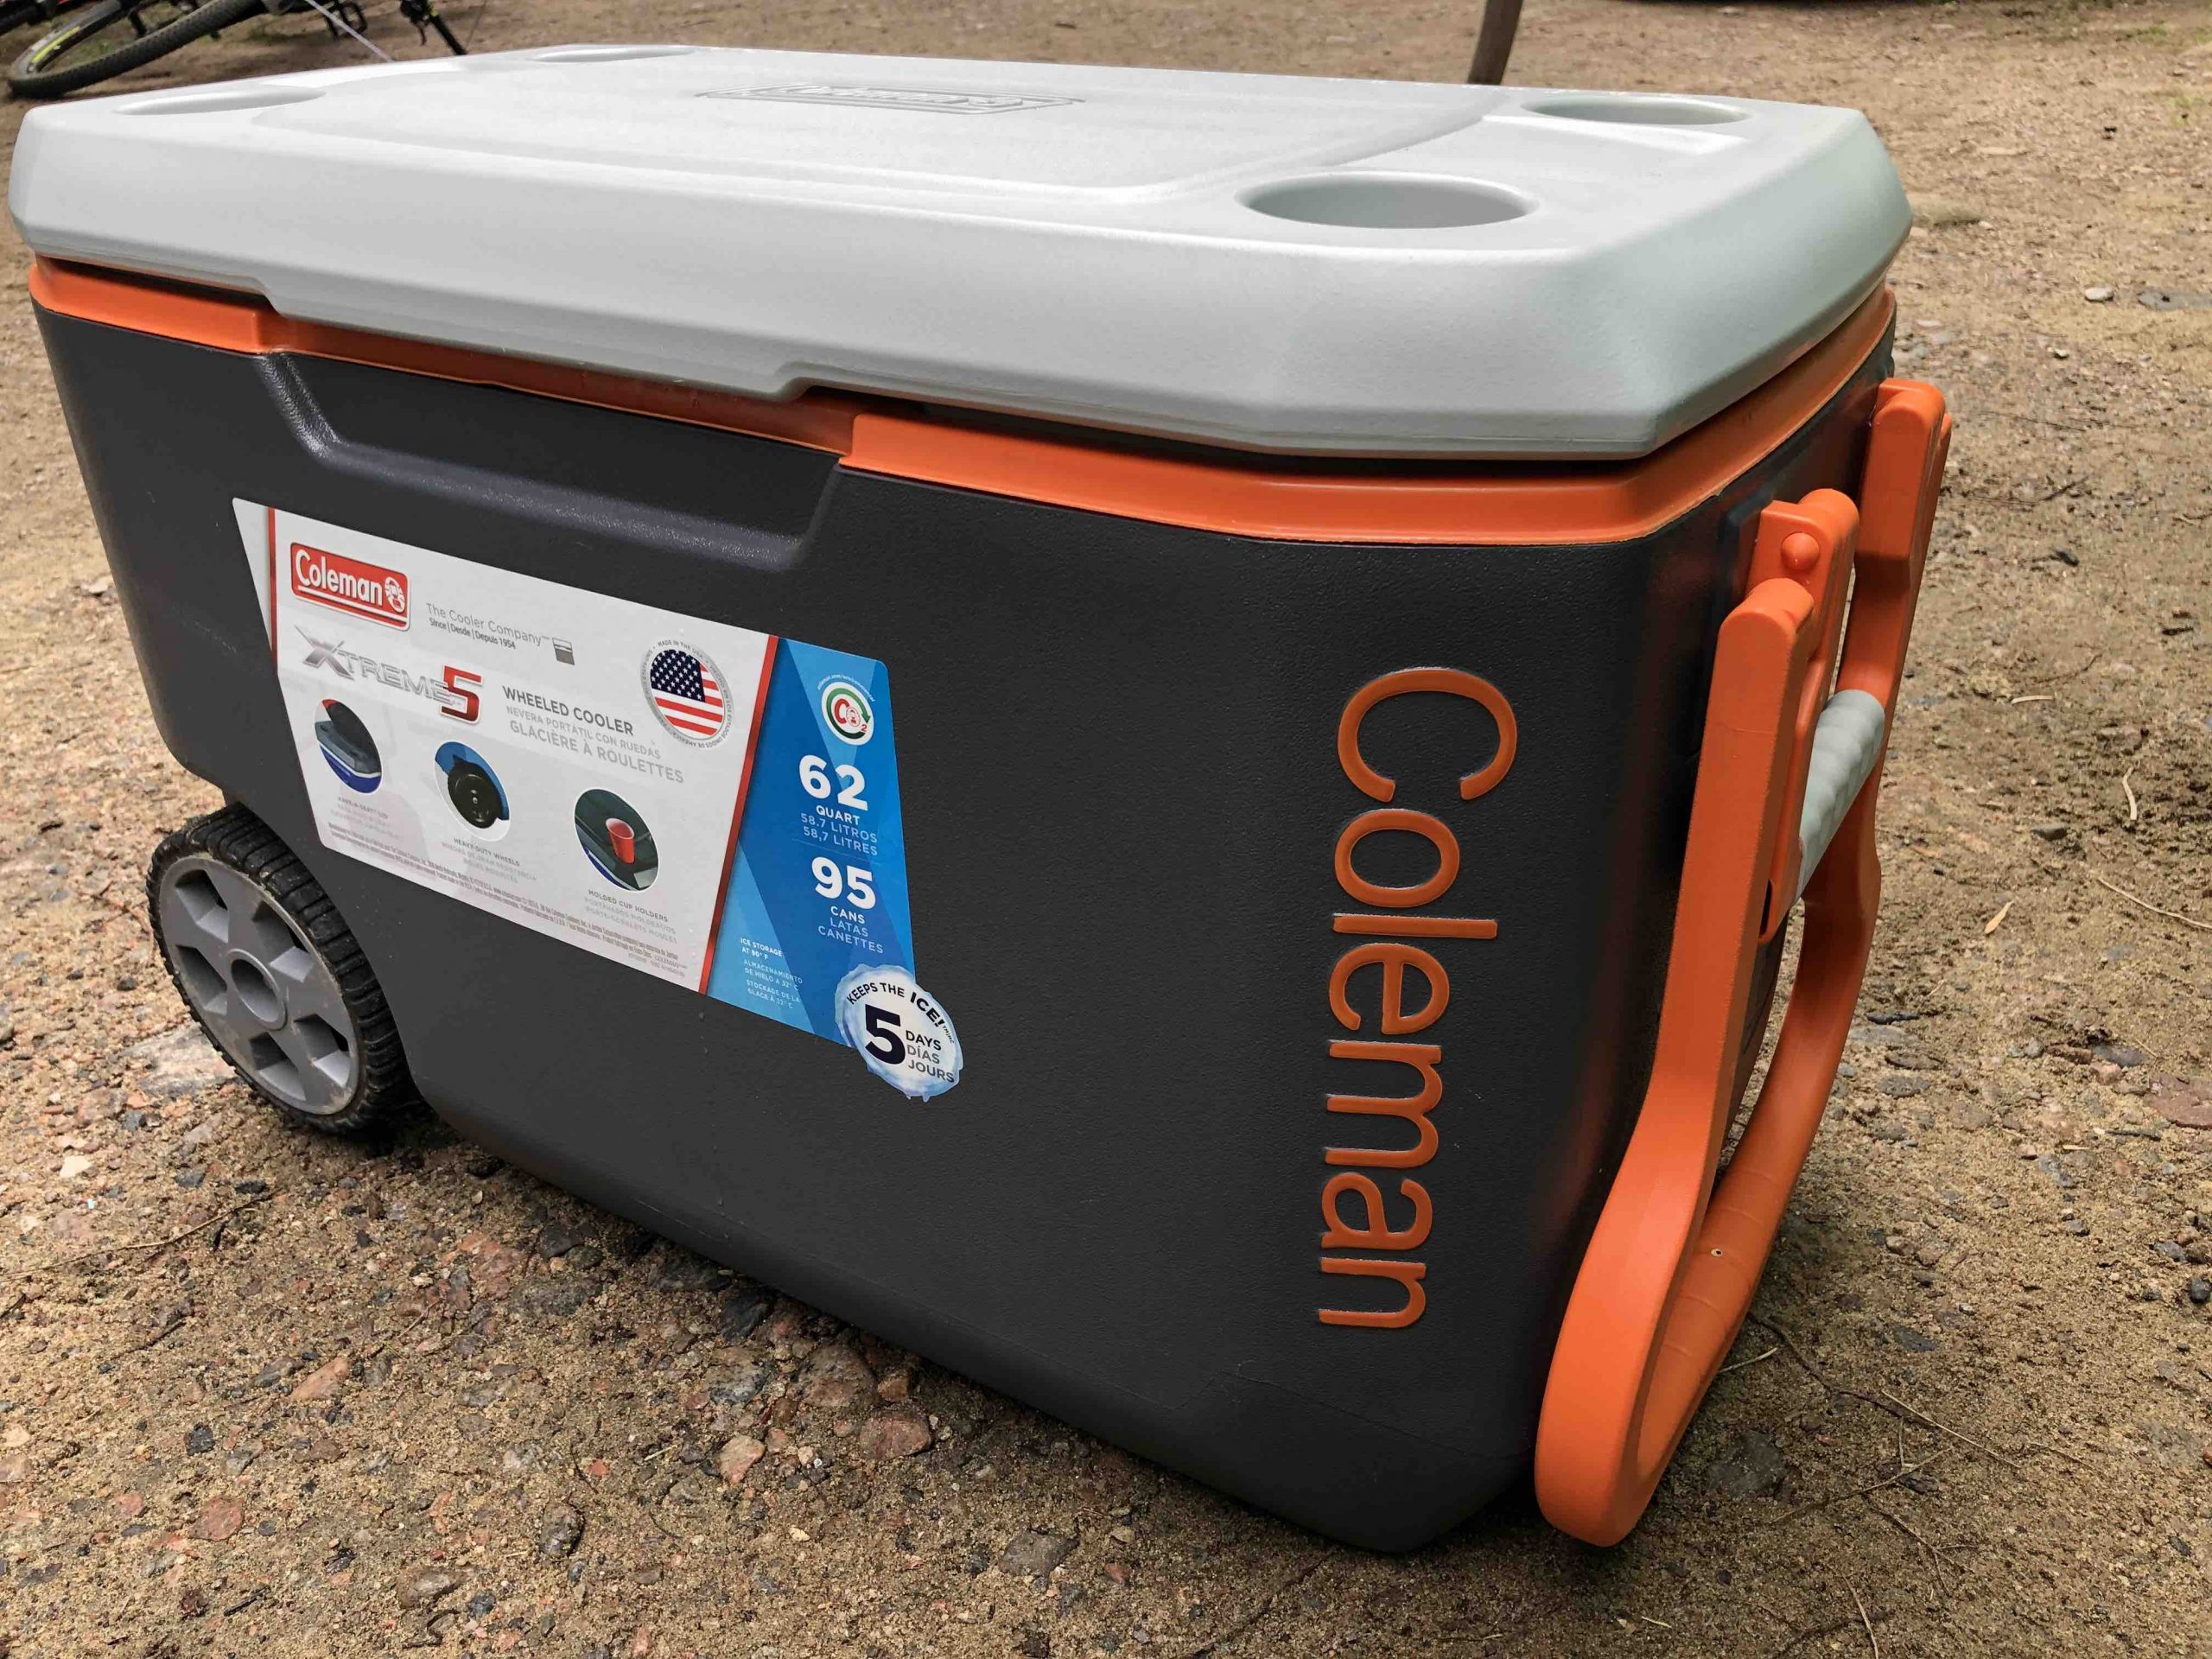 Where is the Best Place to Put a Cooler When Camping?